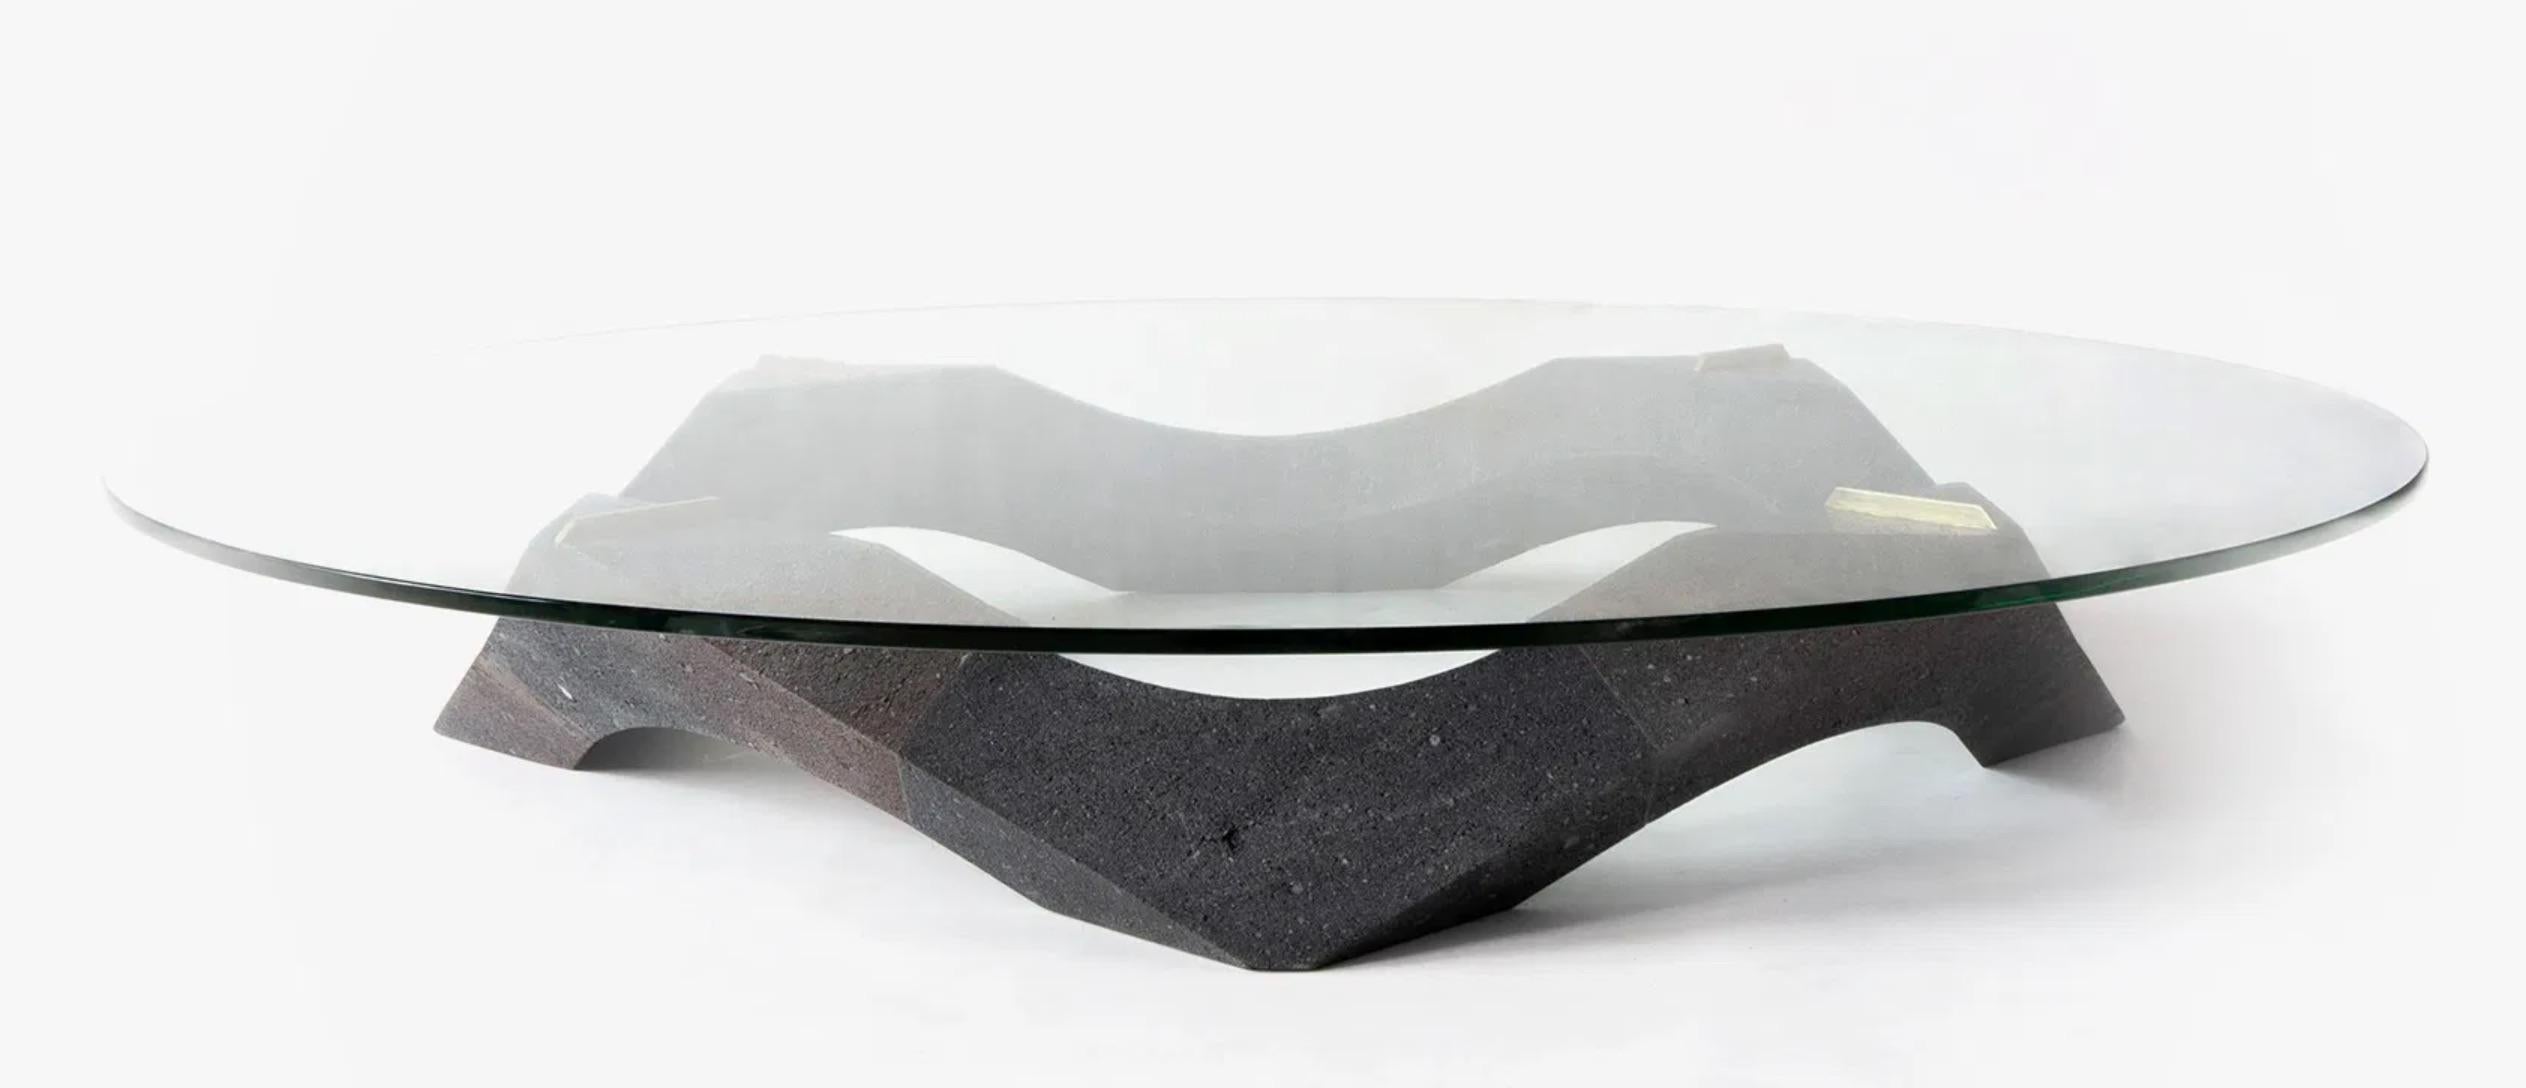 Contemporary Lava Stone and Glass Center Table from Mexico City  For Sale 4